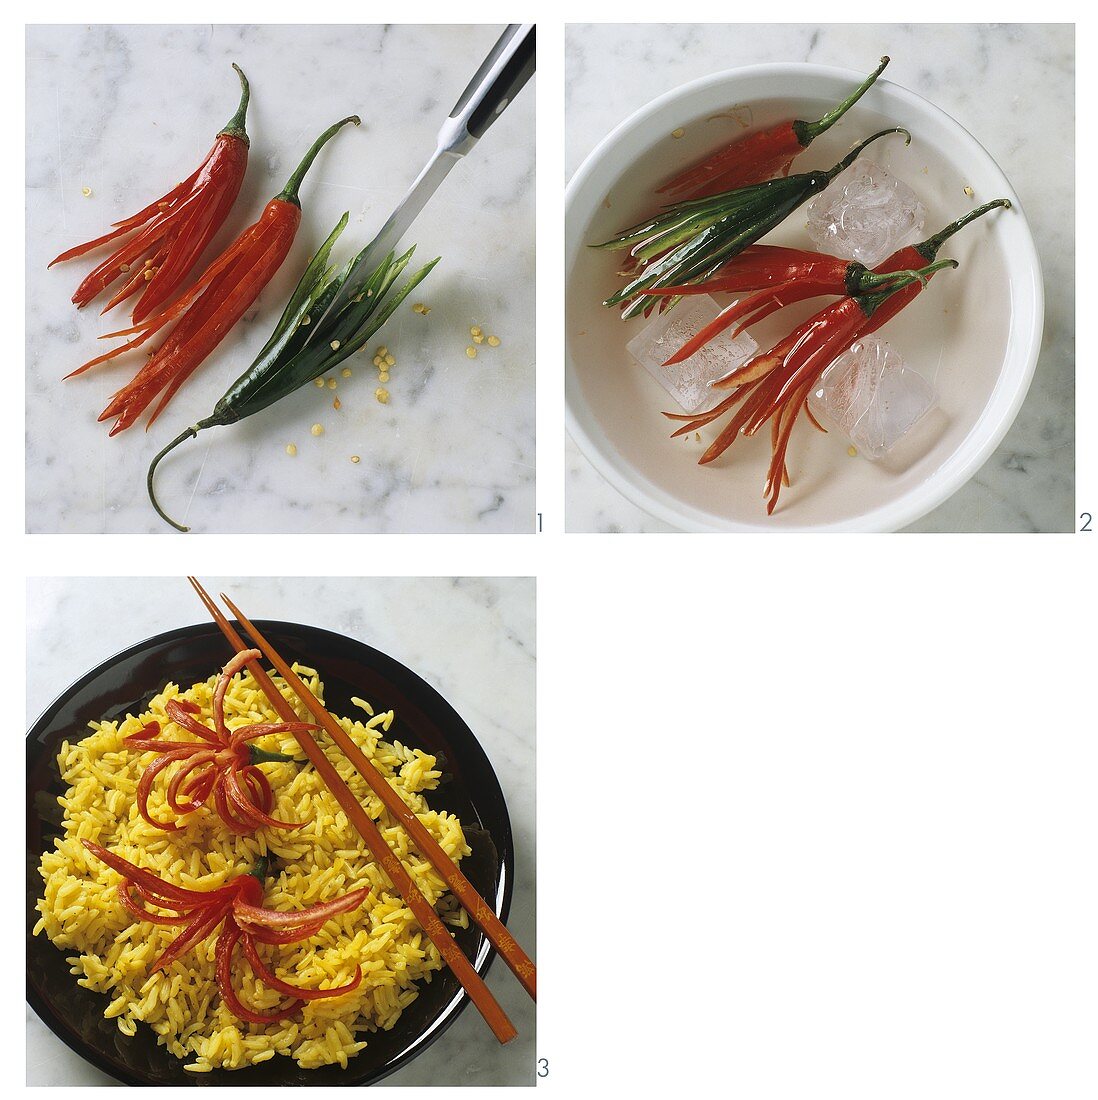 Preparing chili flowers on curried rice